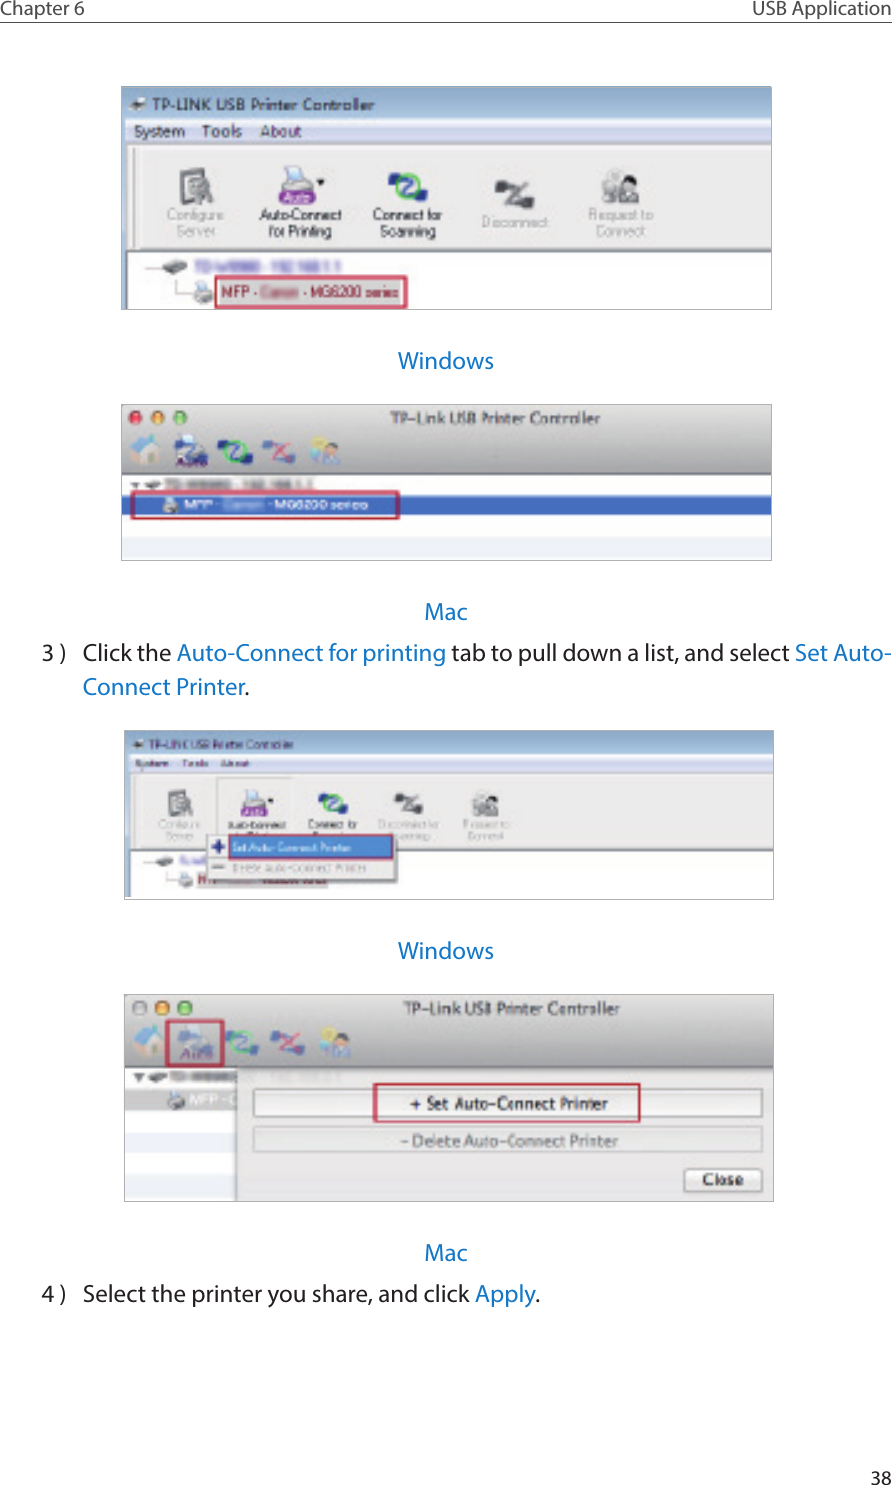 38Chapter 6 USB ApplicationWindowsMac3 )  Click the Auto-Connect for printing tab to pull down a list, and select Set Auto-Connect Printer. Windows Mac4 )  Select the printer you share, and click Apply.